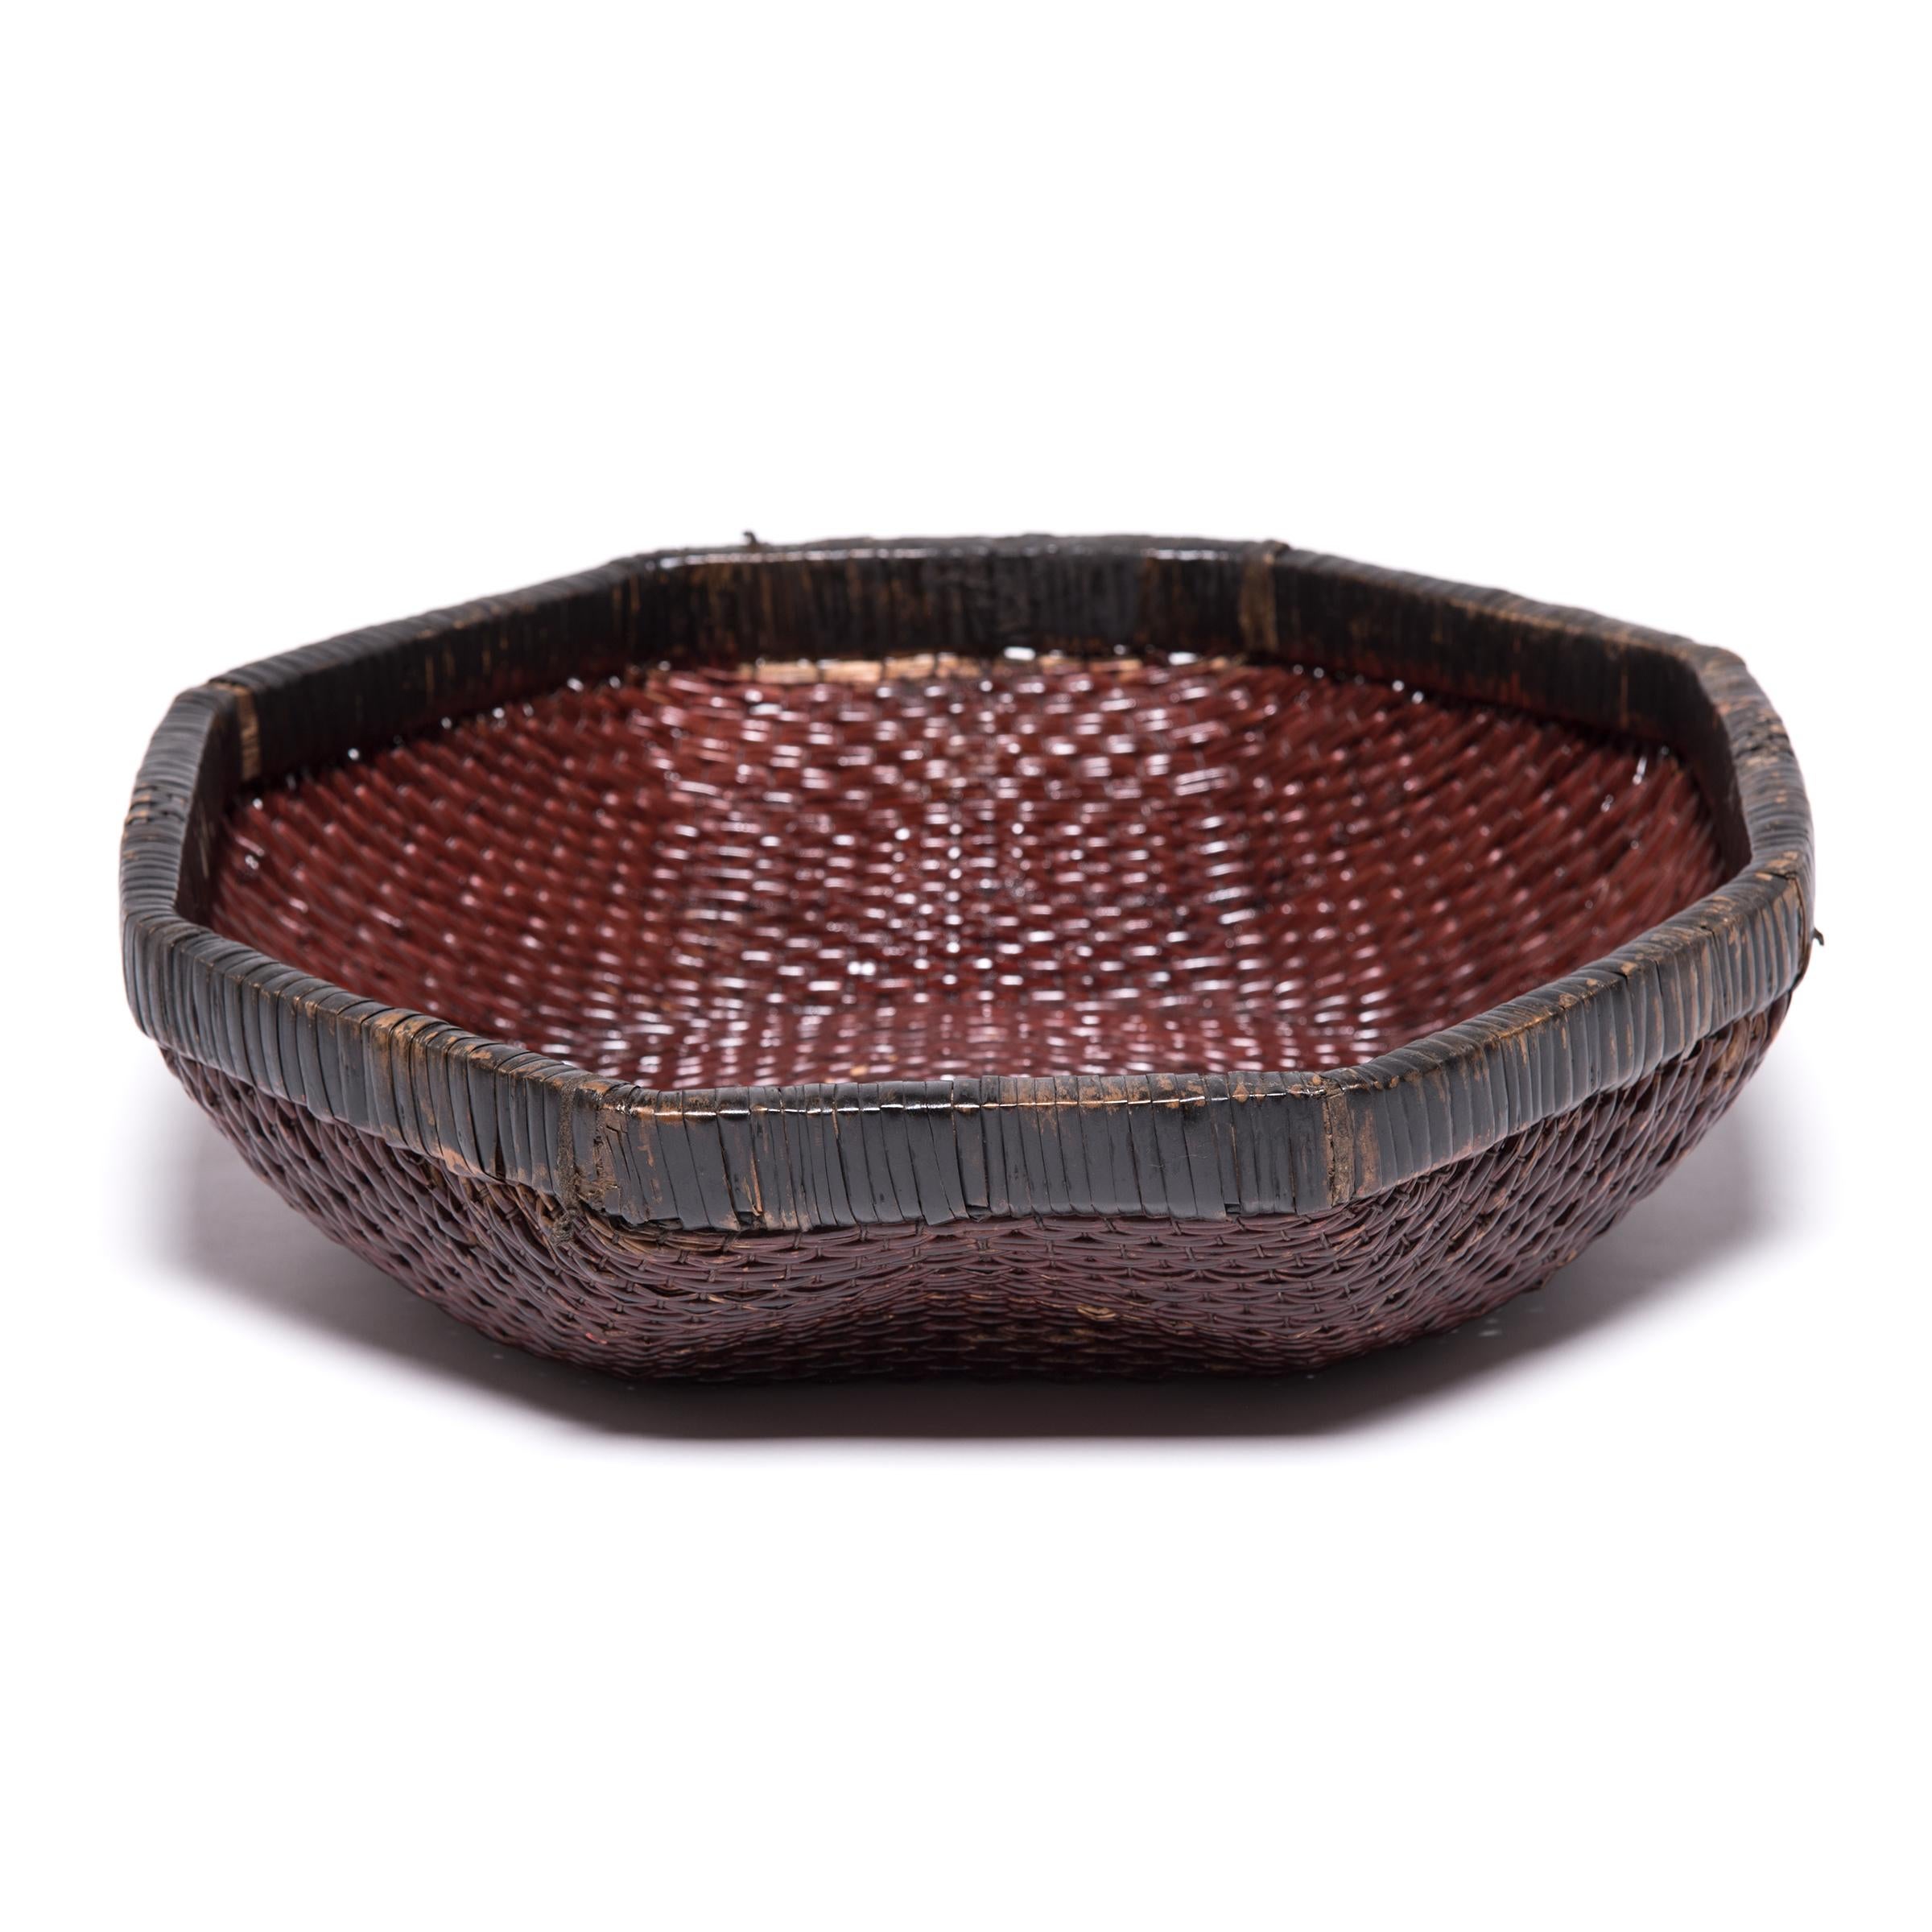 Qing Chinese Woven Field Basket, circa 1900